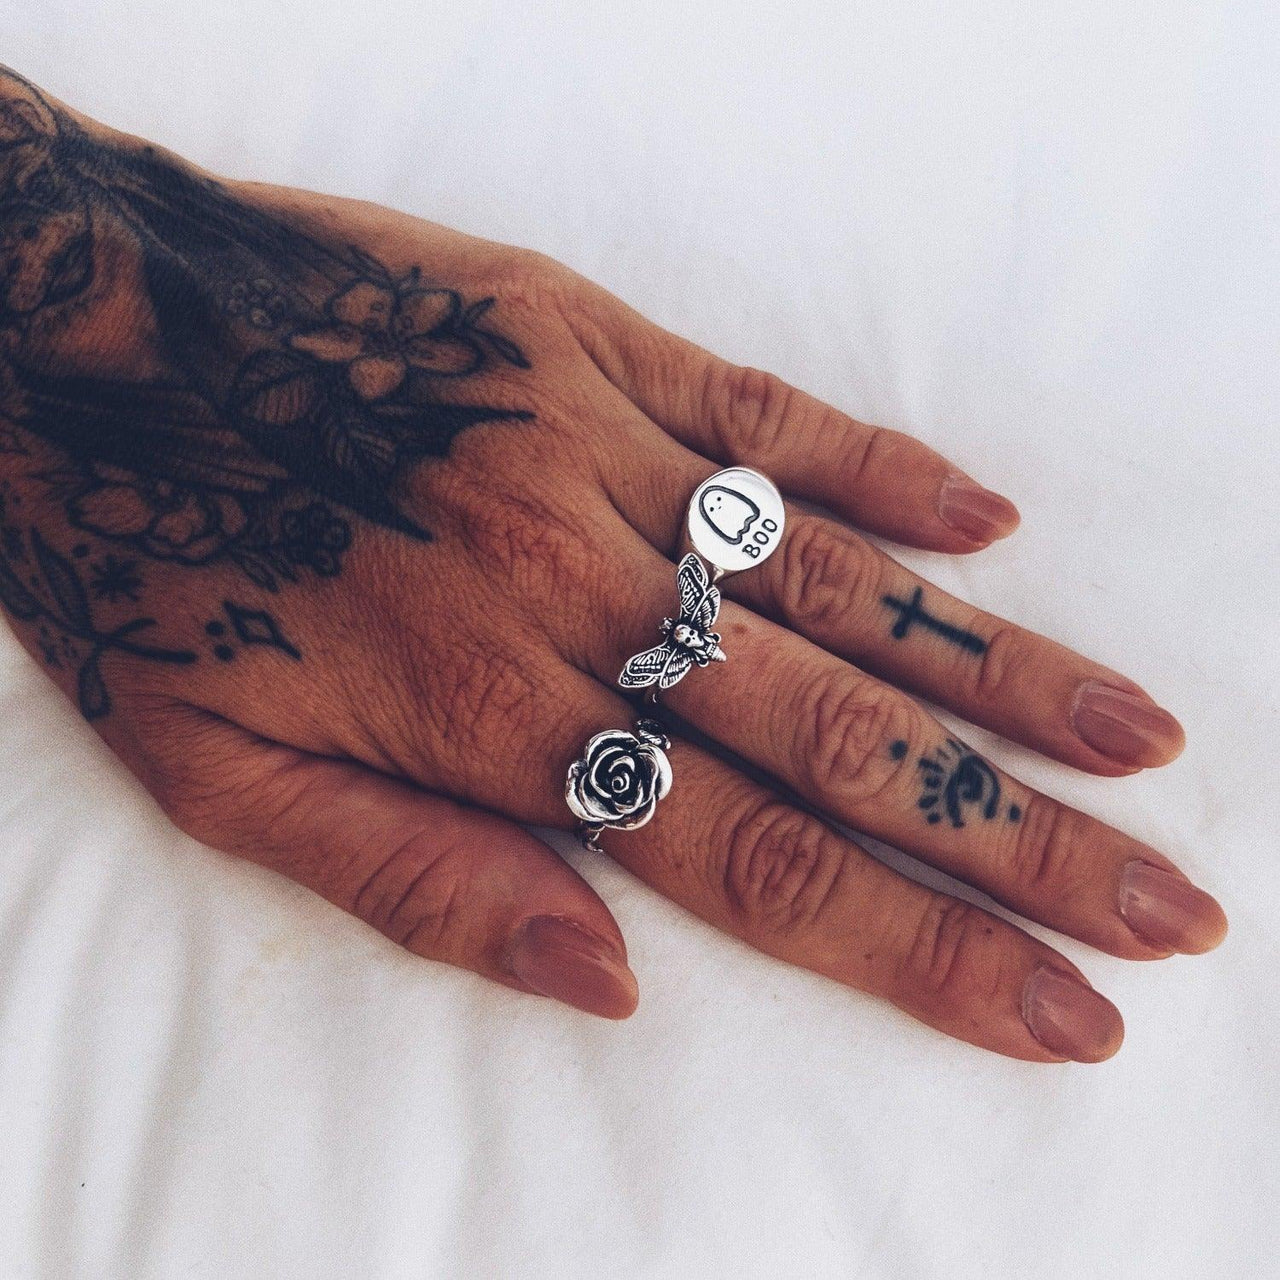 Black Feather Design's Rose Ring, Boo Ring & Moth Ring